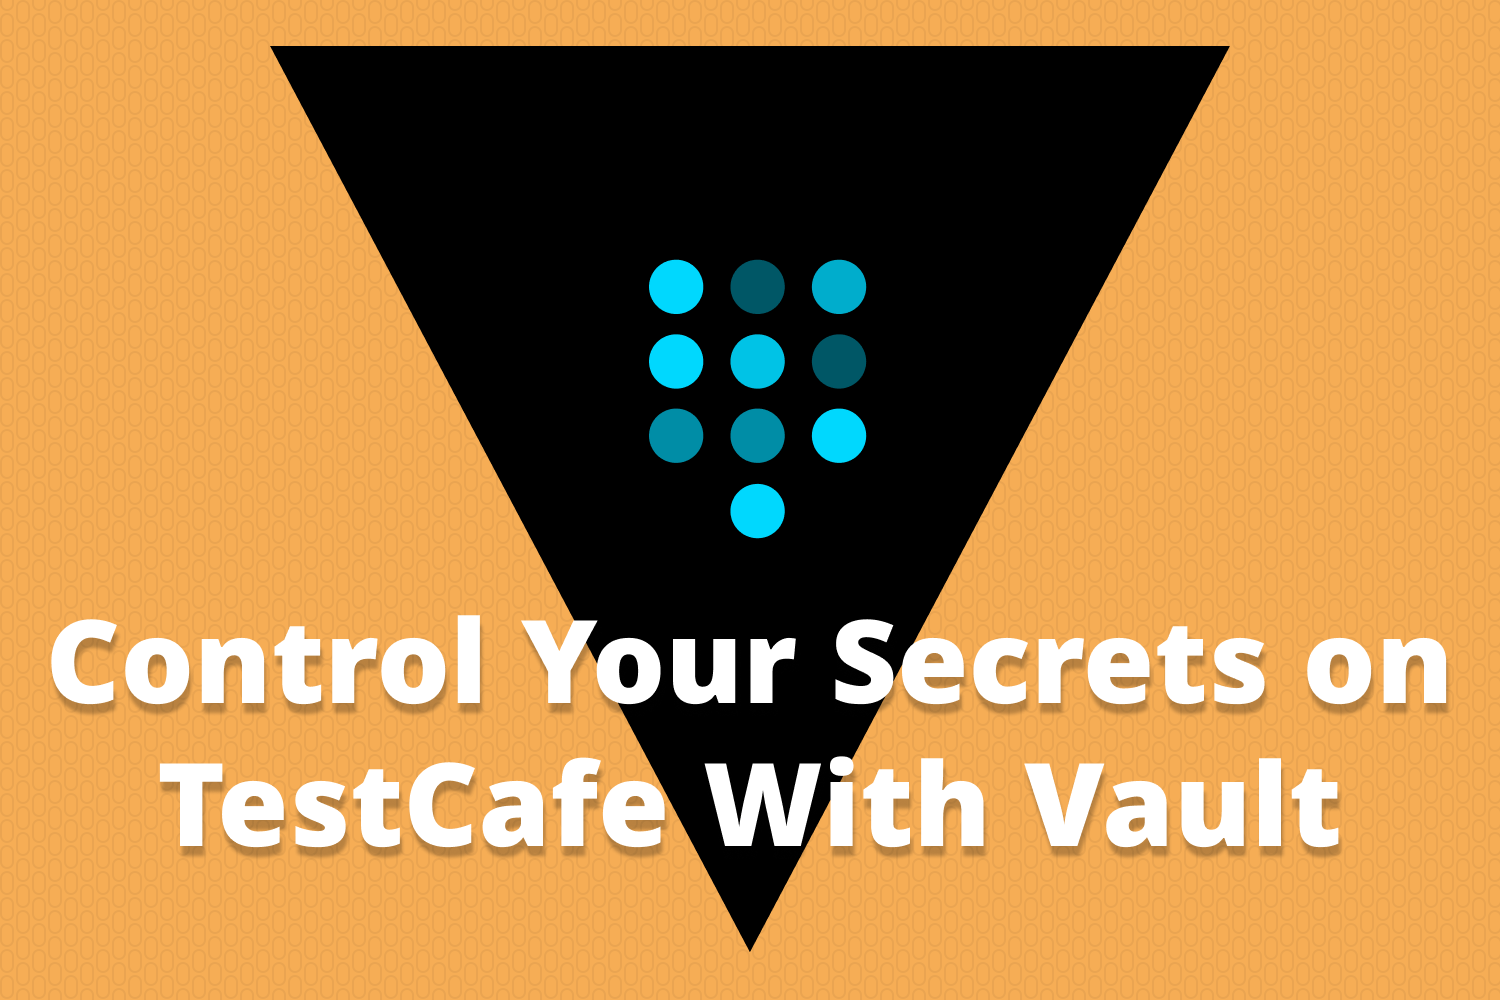 Control Your Secrets on TestCafe With Vault